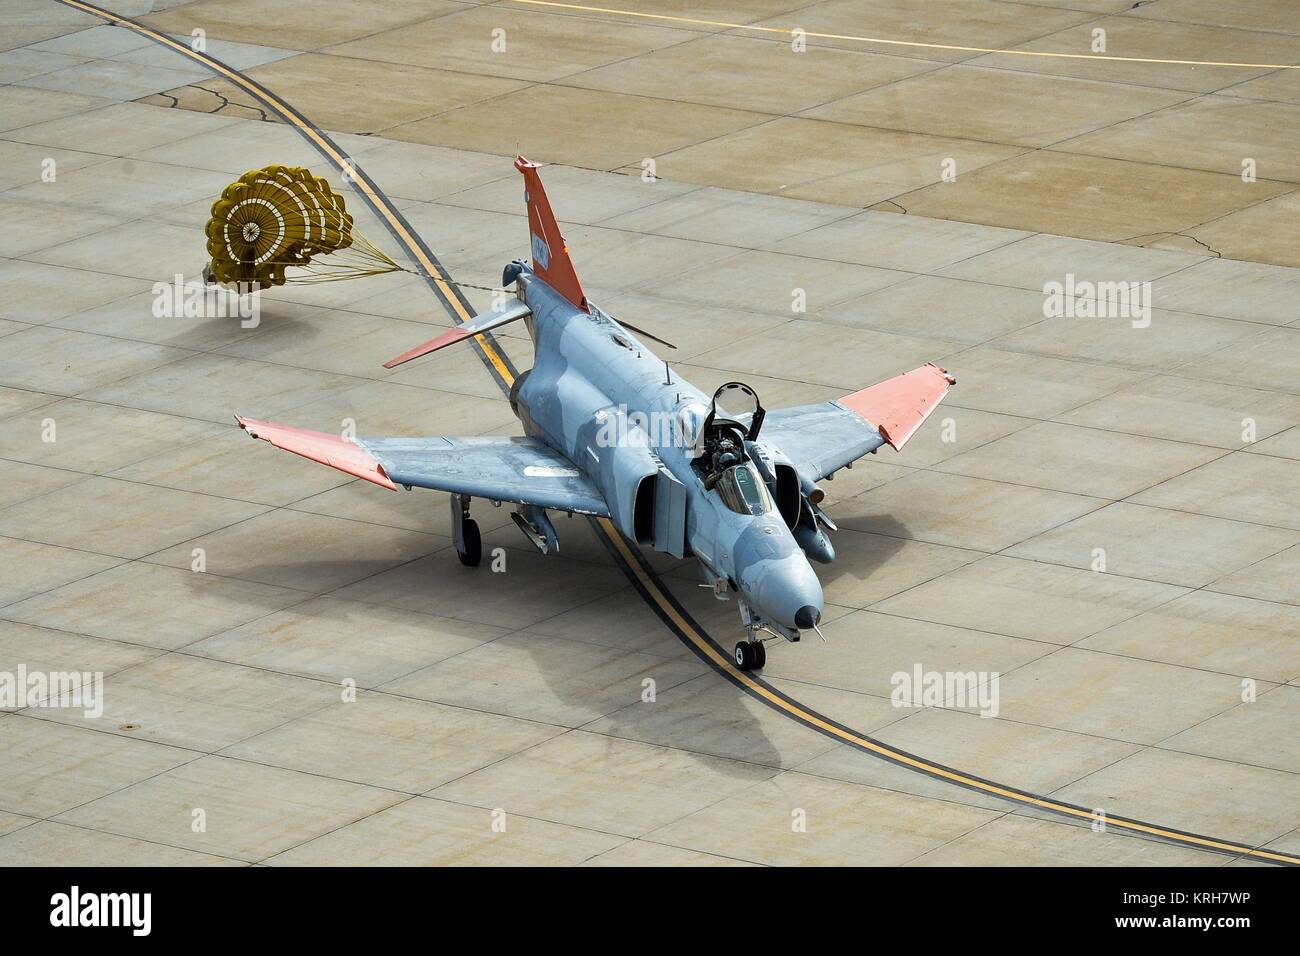 A QF-4 fighter aircraft used as an aerial target lands at Hill Air Force Base October 25, 2016 near Ogden, Utah. Stock Photo